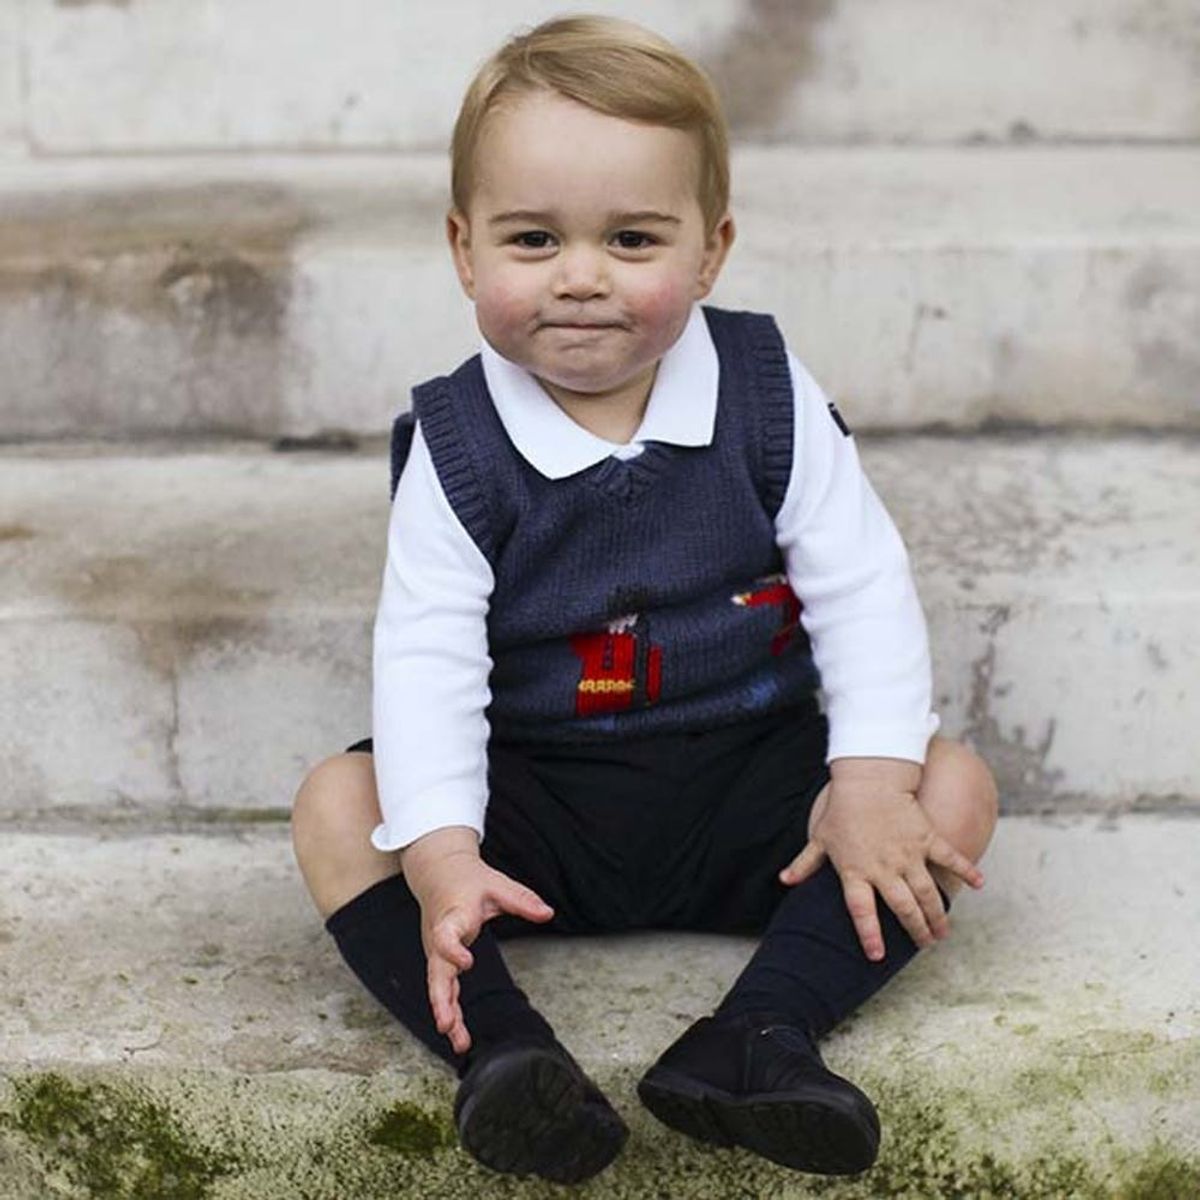 Kensington Palace Celebrated Prince George’s Birthday Early With a New Photo